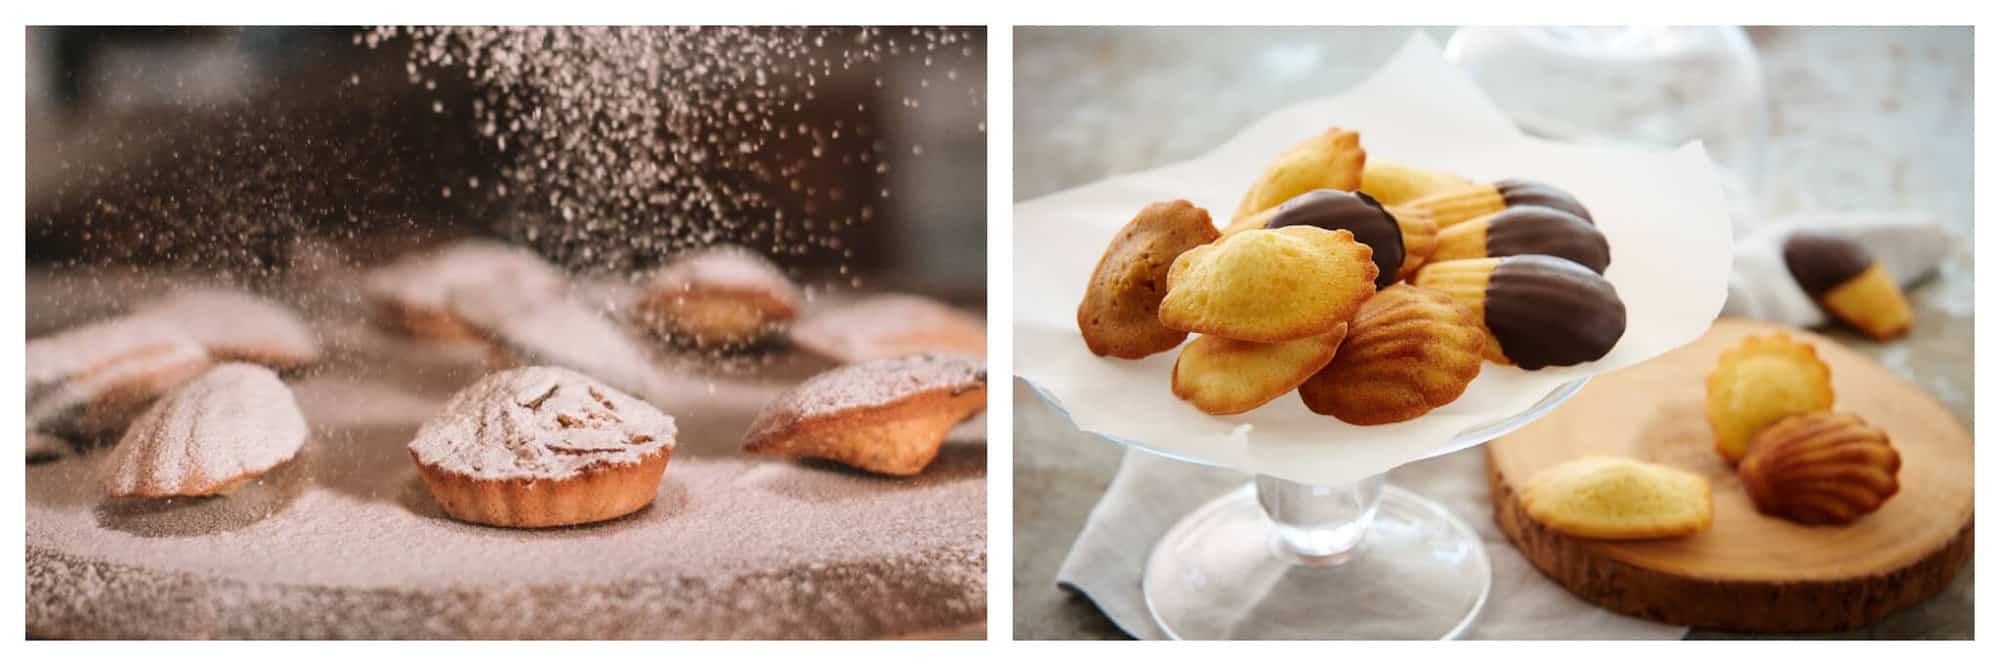 Left: a tray of French desserts called madeleines being covered in powdered sugar. The sugar is visible on the cakes as well as in the air. Right A white platter of madeleines. There is also a small cutting board to the right with more cakes. Some of the madeleines are covered in chocolate.